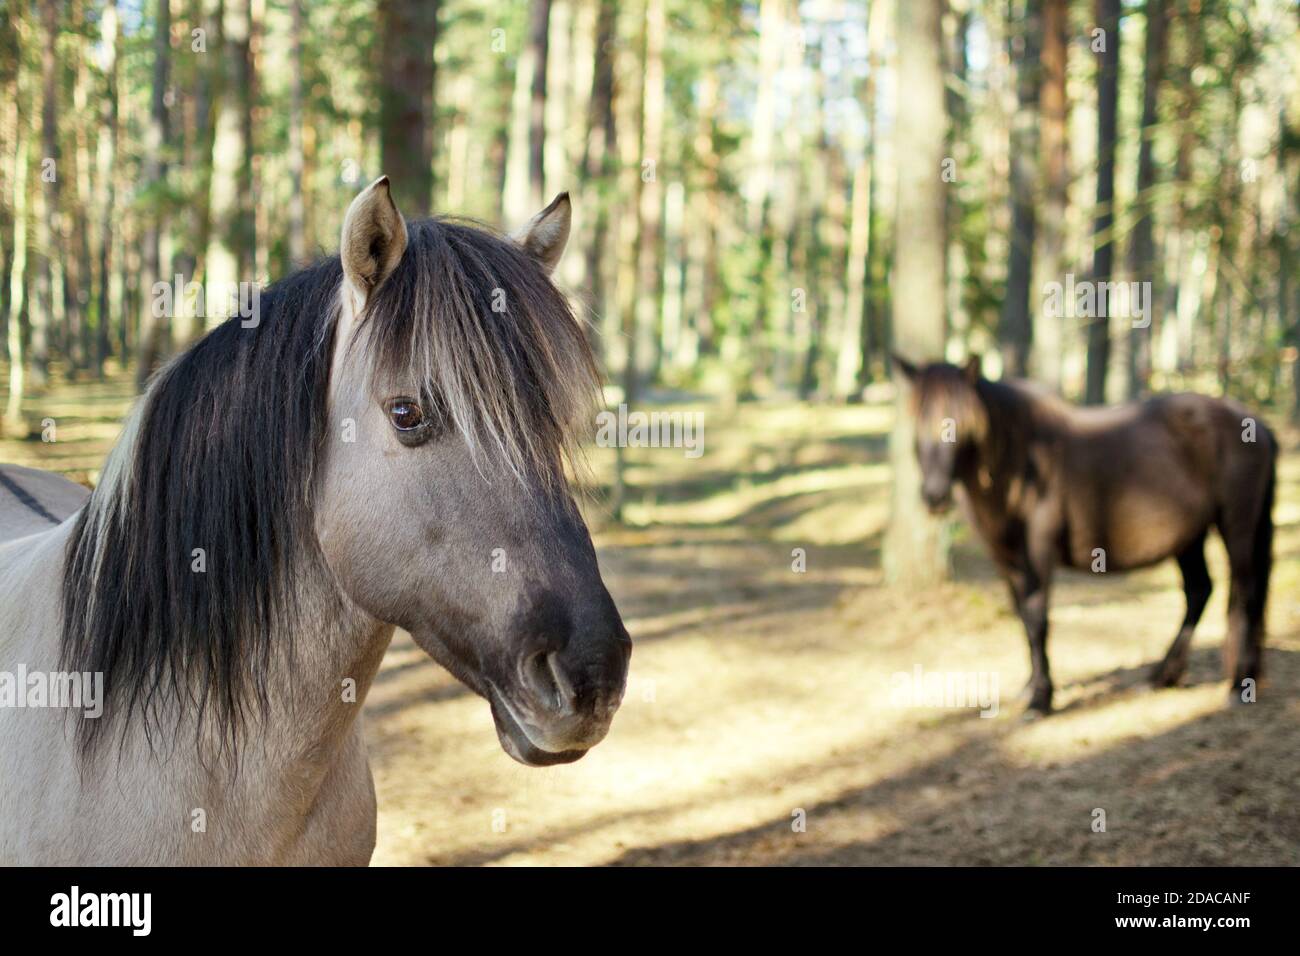 Close up portrait of semi-wild konik polski horse in the forest at sunny spring day Stock Photo